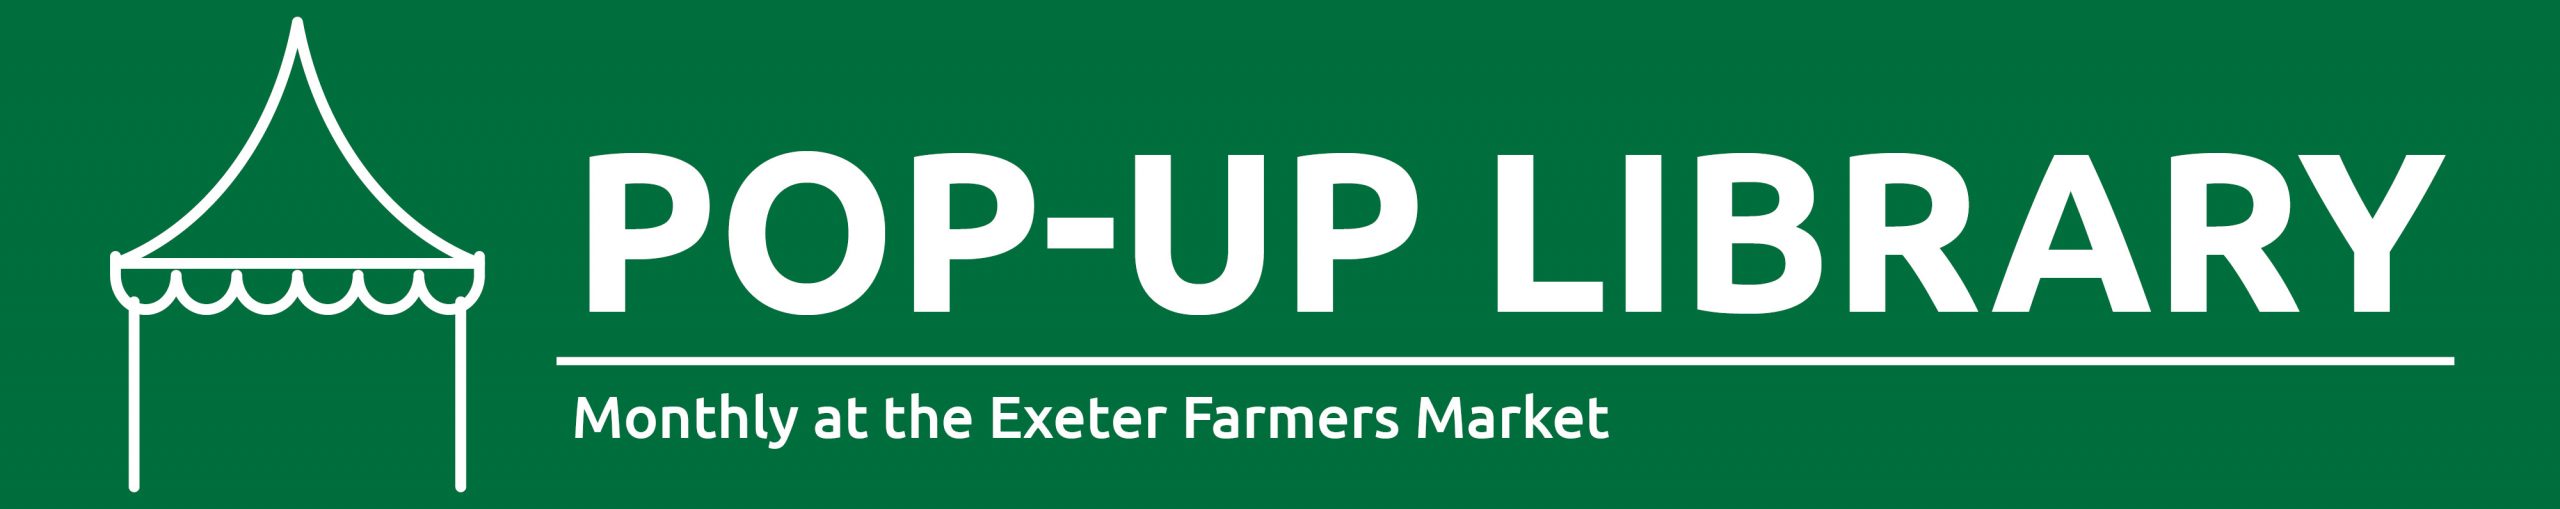 Graphic of a tent with text promoting pop-up libraries at the Exeter Farmers Market